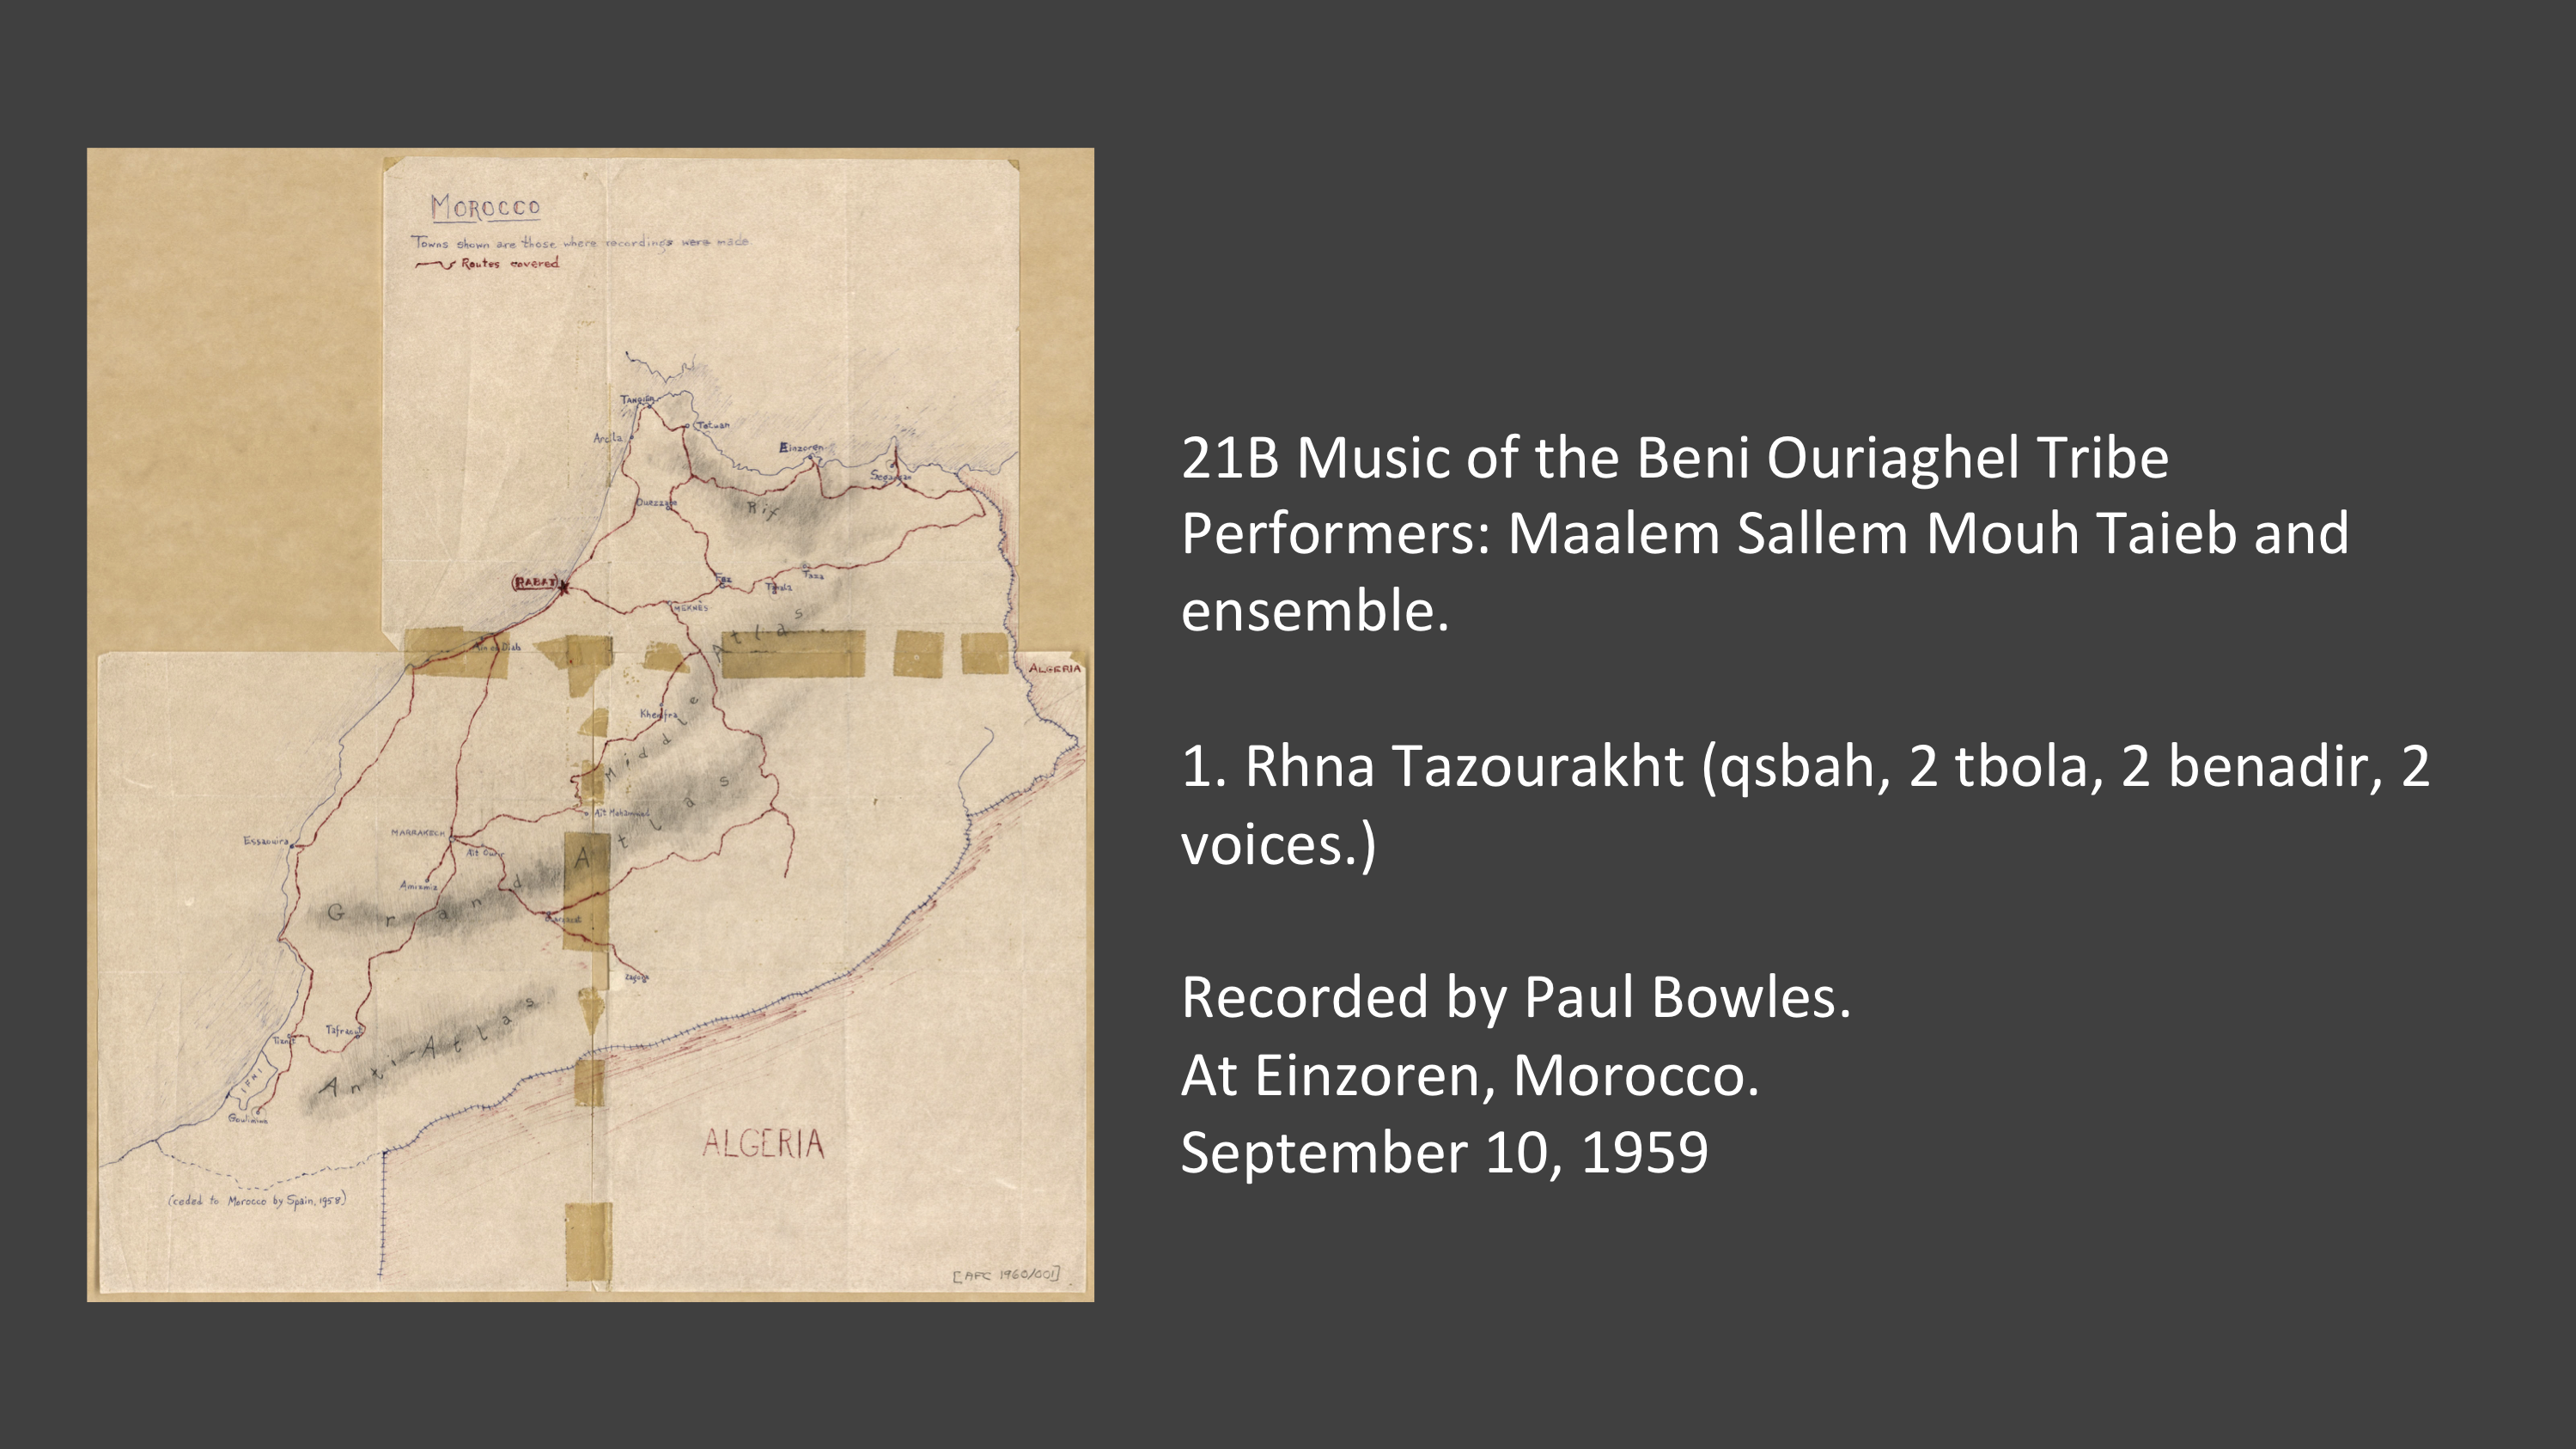 21B-1 Rhana Tazourakht (qsbah, 2 tbola, 2 benadir, 2 voices)
Performers: Maalem Sallem Mouh Taieb and ensemble.
Recorded by Paul Bowles.
At Einzoren, Morocco.
September 10, 1959